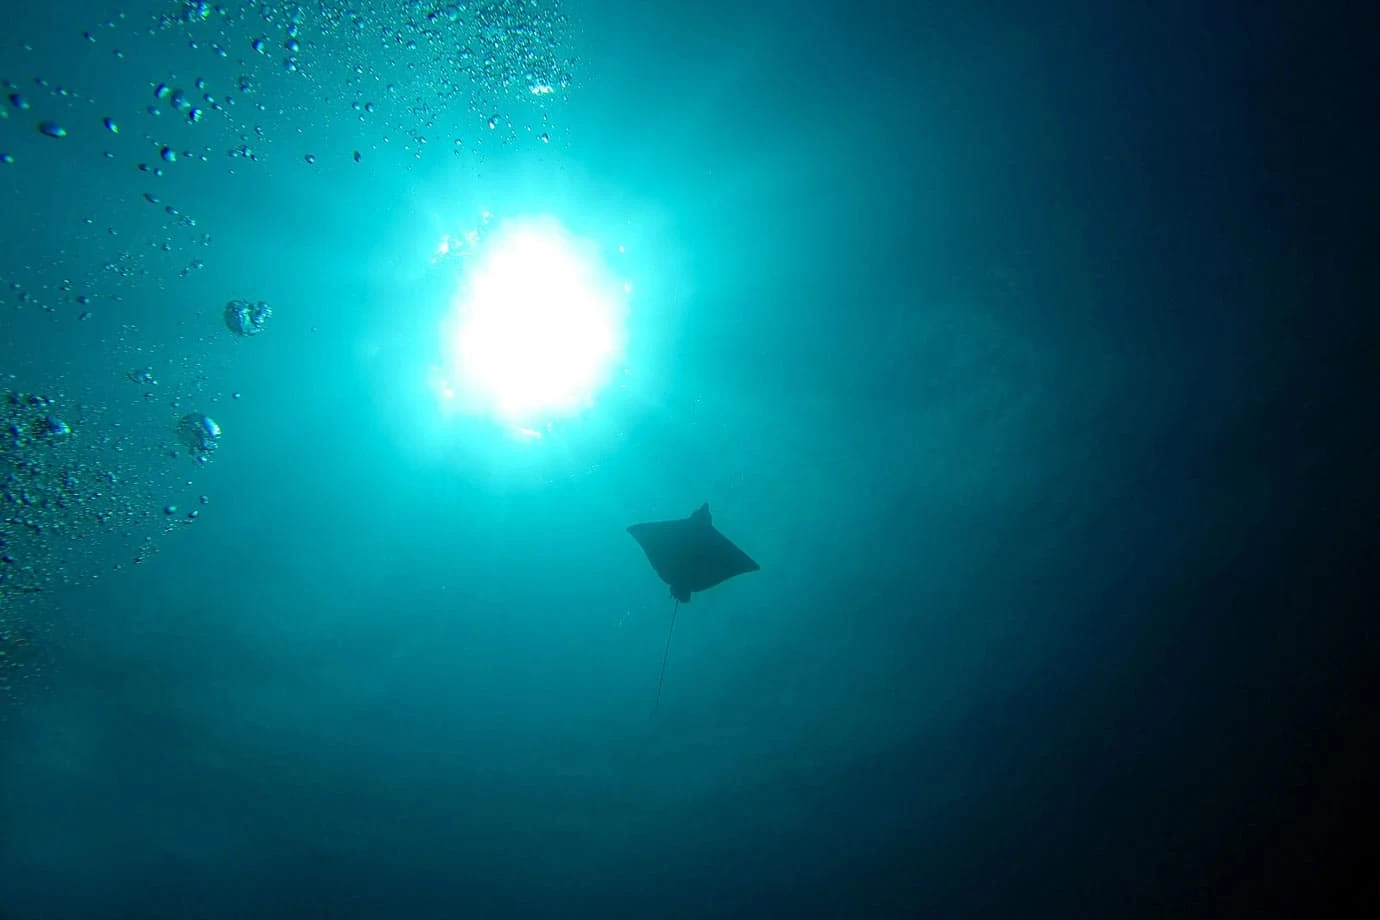 A spotted eagle ray silhouetted by the sun overhead